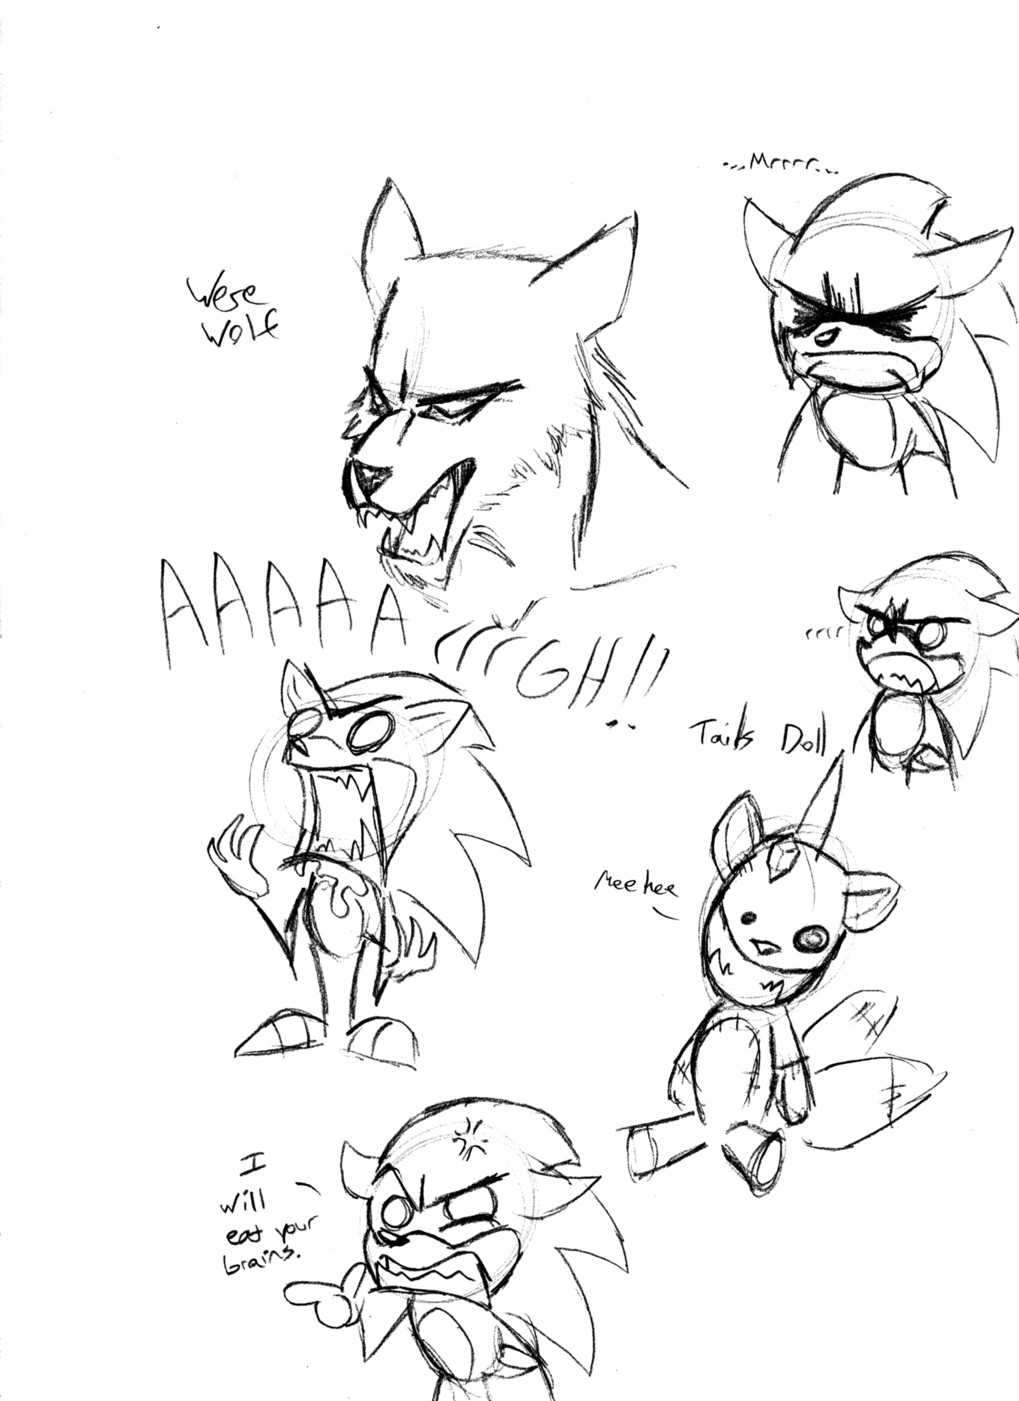 Angry Sonic Sketch Dump 2 by TheGameArtCritic